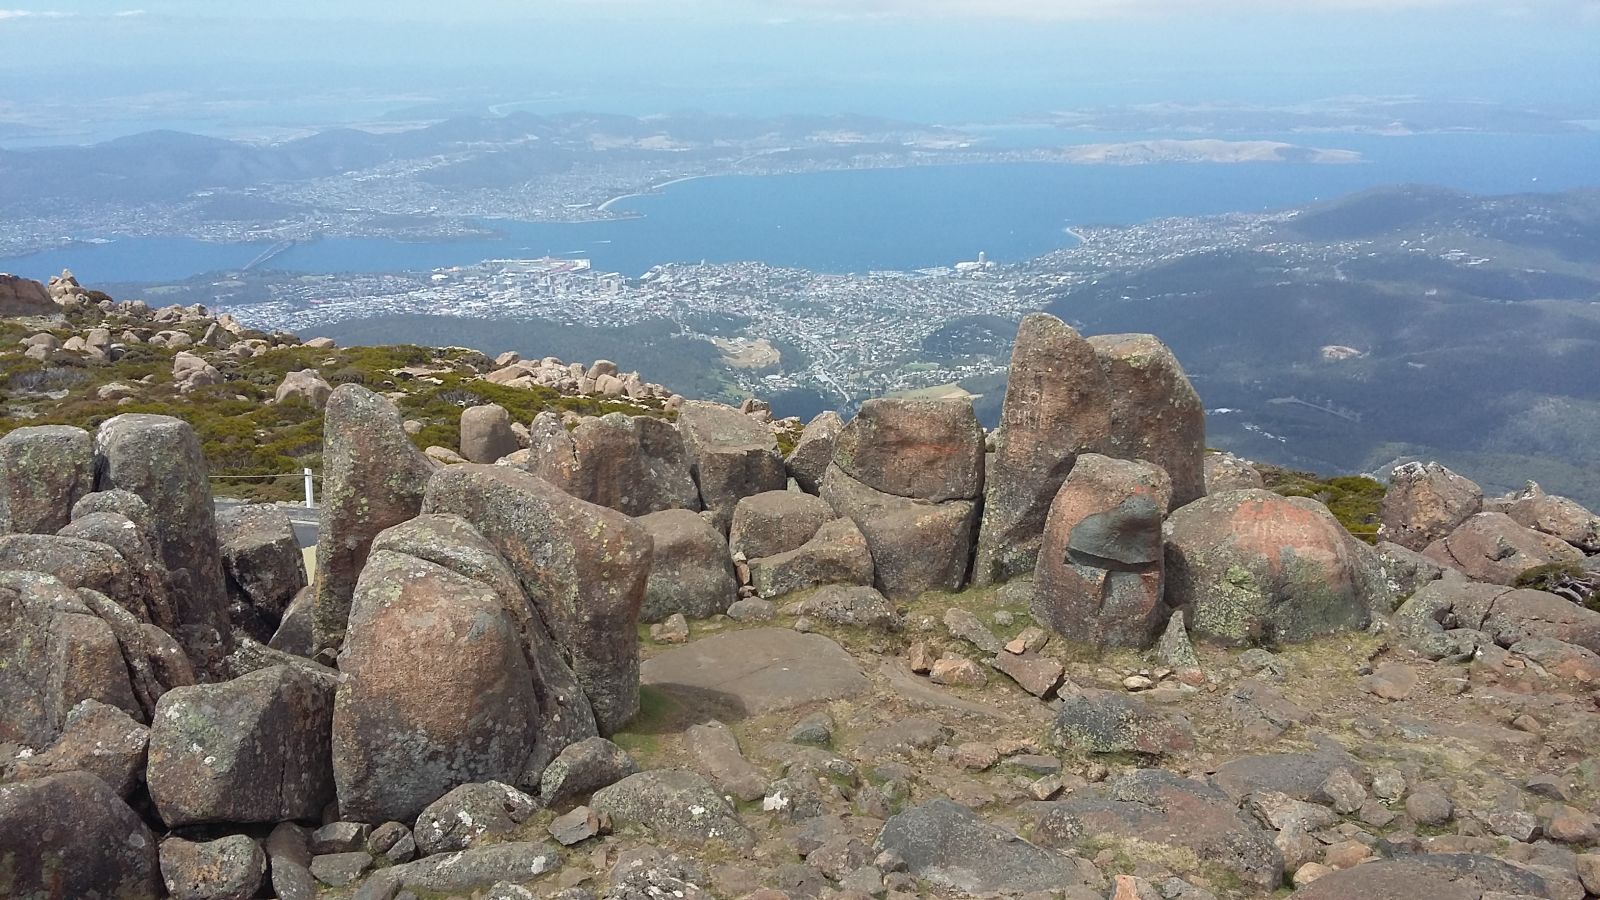 Hobart, from the top of Mt. Wellington